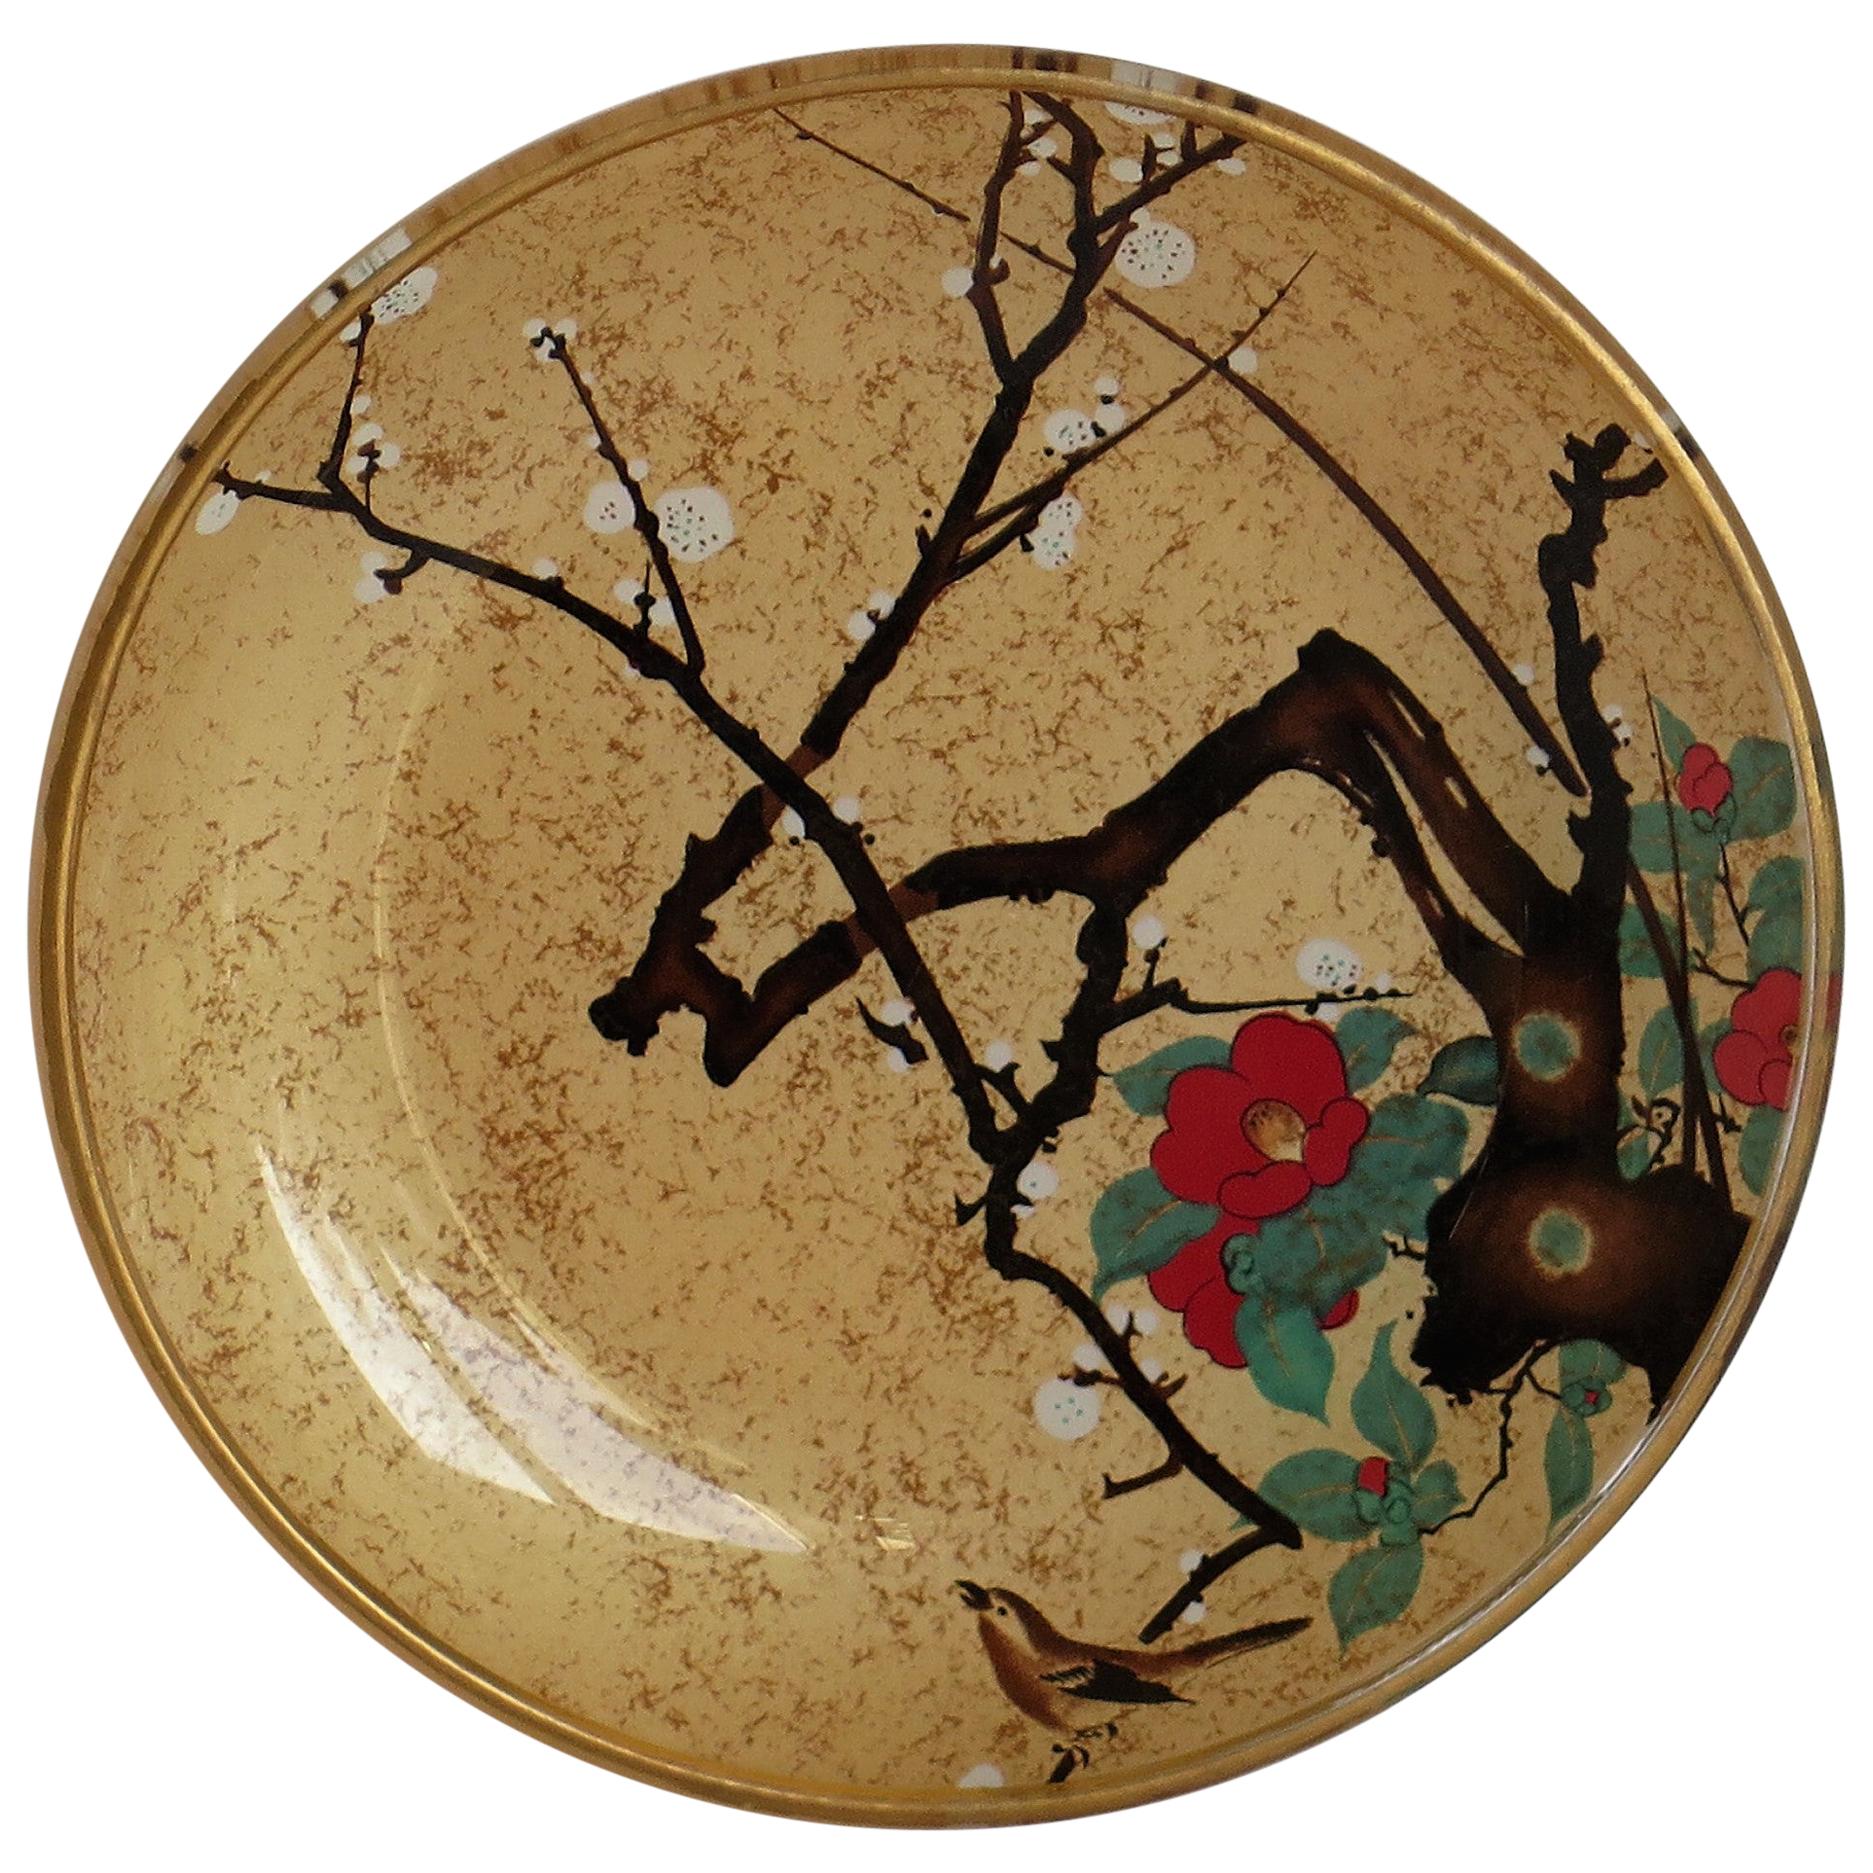 Small Japanese Glass Dish with Hand Painted Kakiemon Decoration, circa 1920